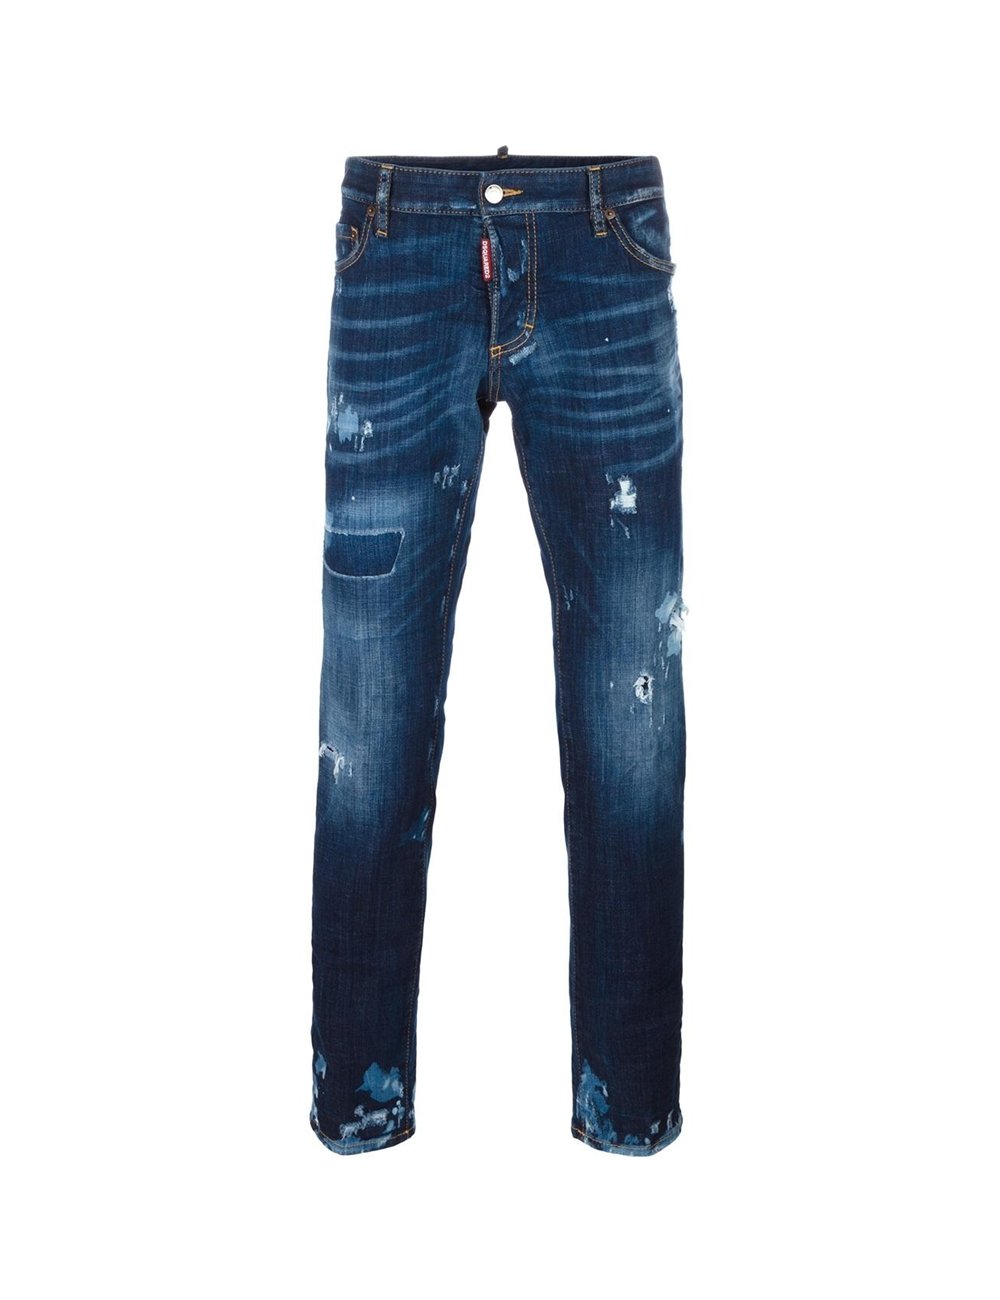 dsquared jeans homme 2017